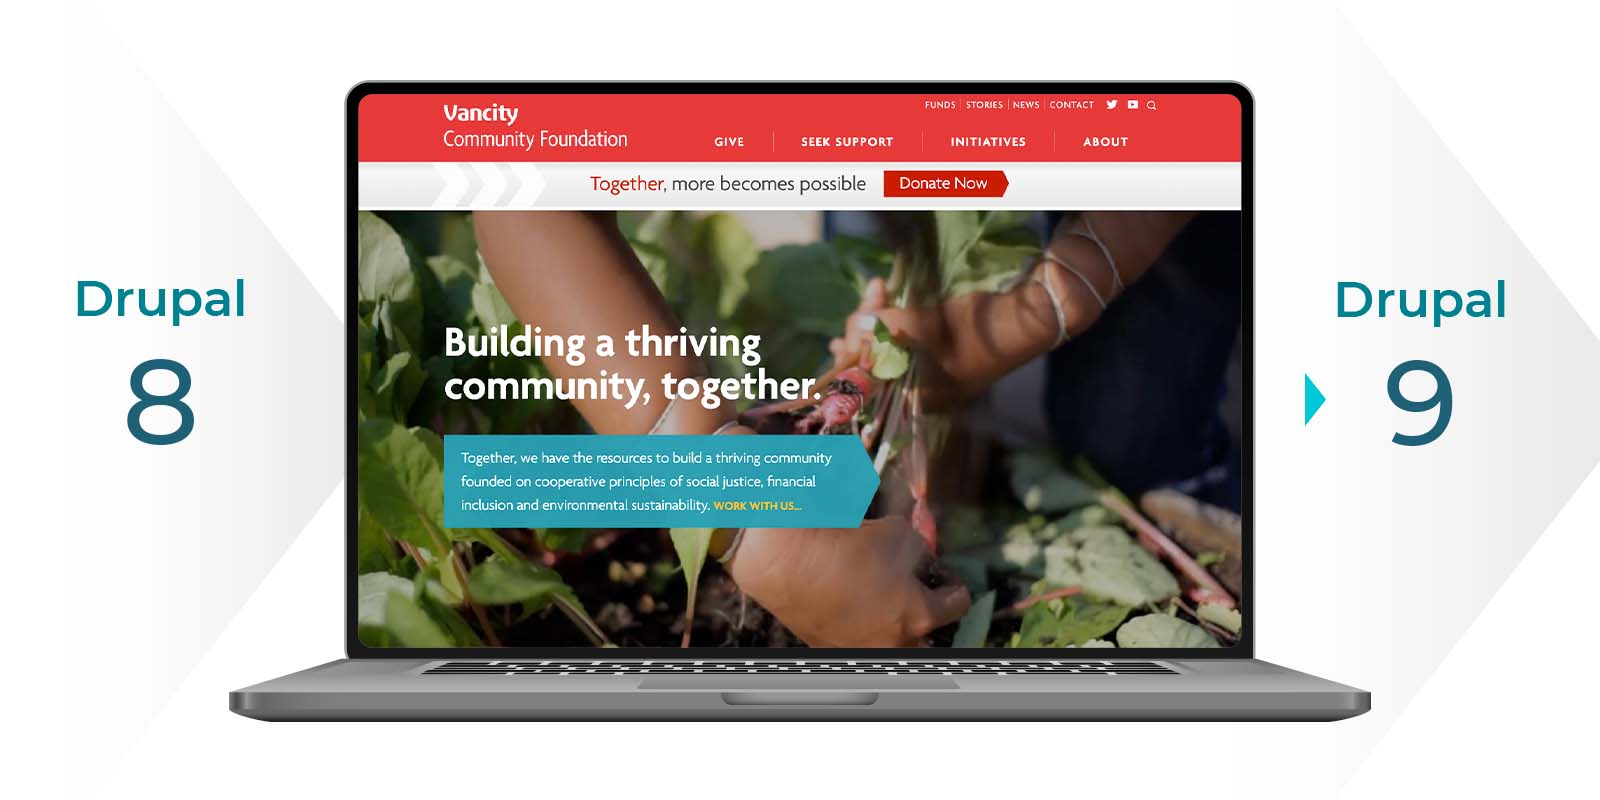 Image of a laptop with the Vancity Community Foundation website on the screen.